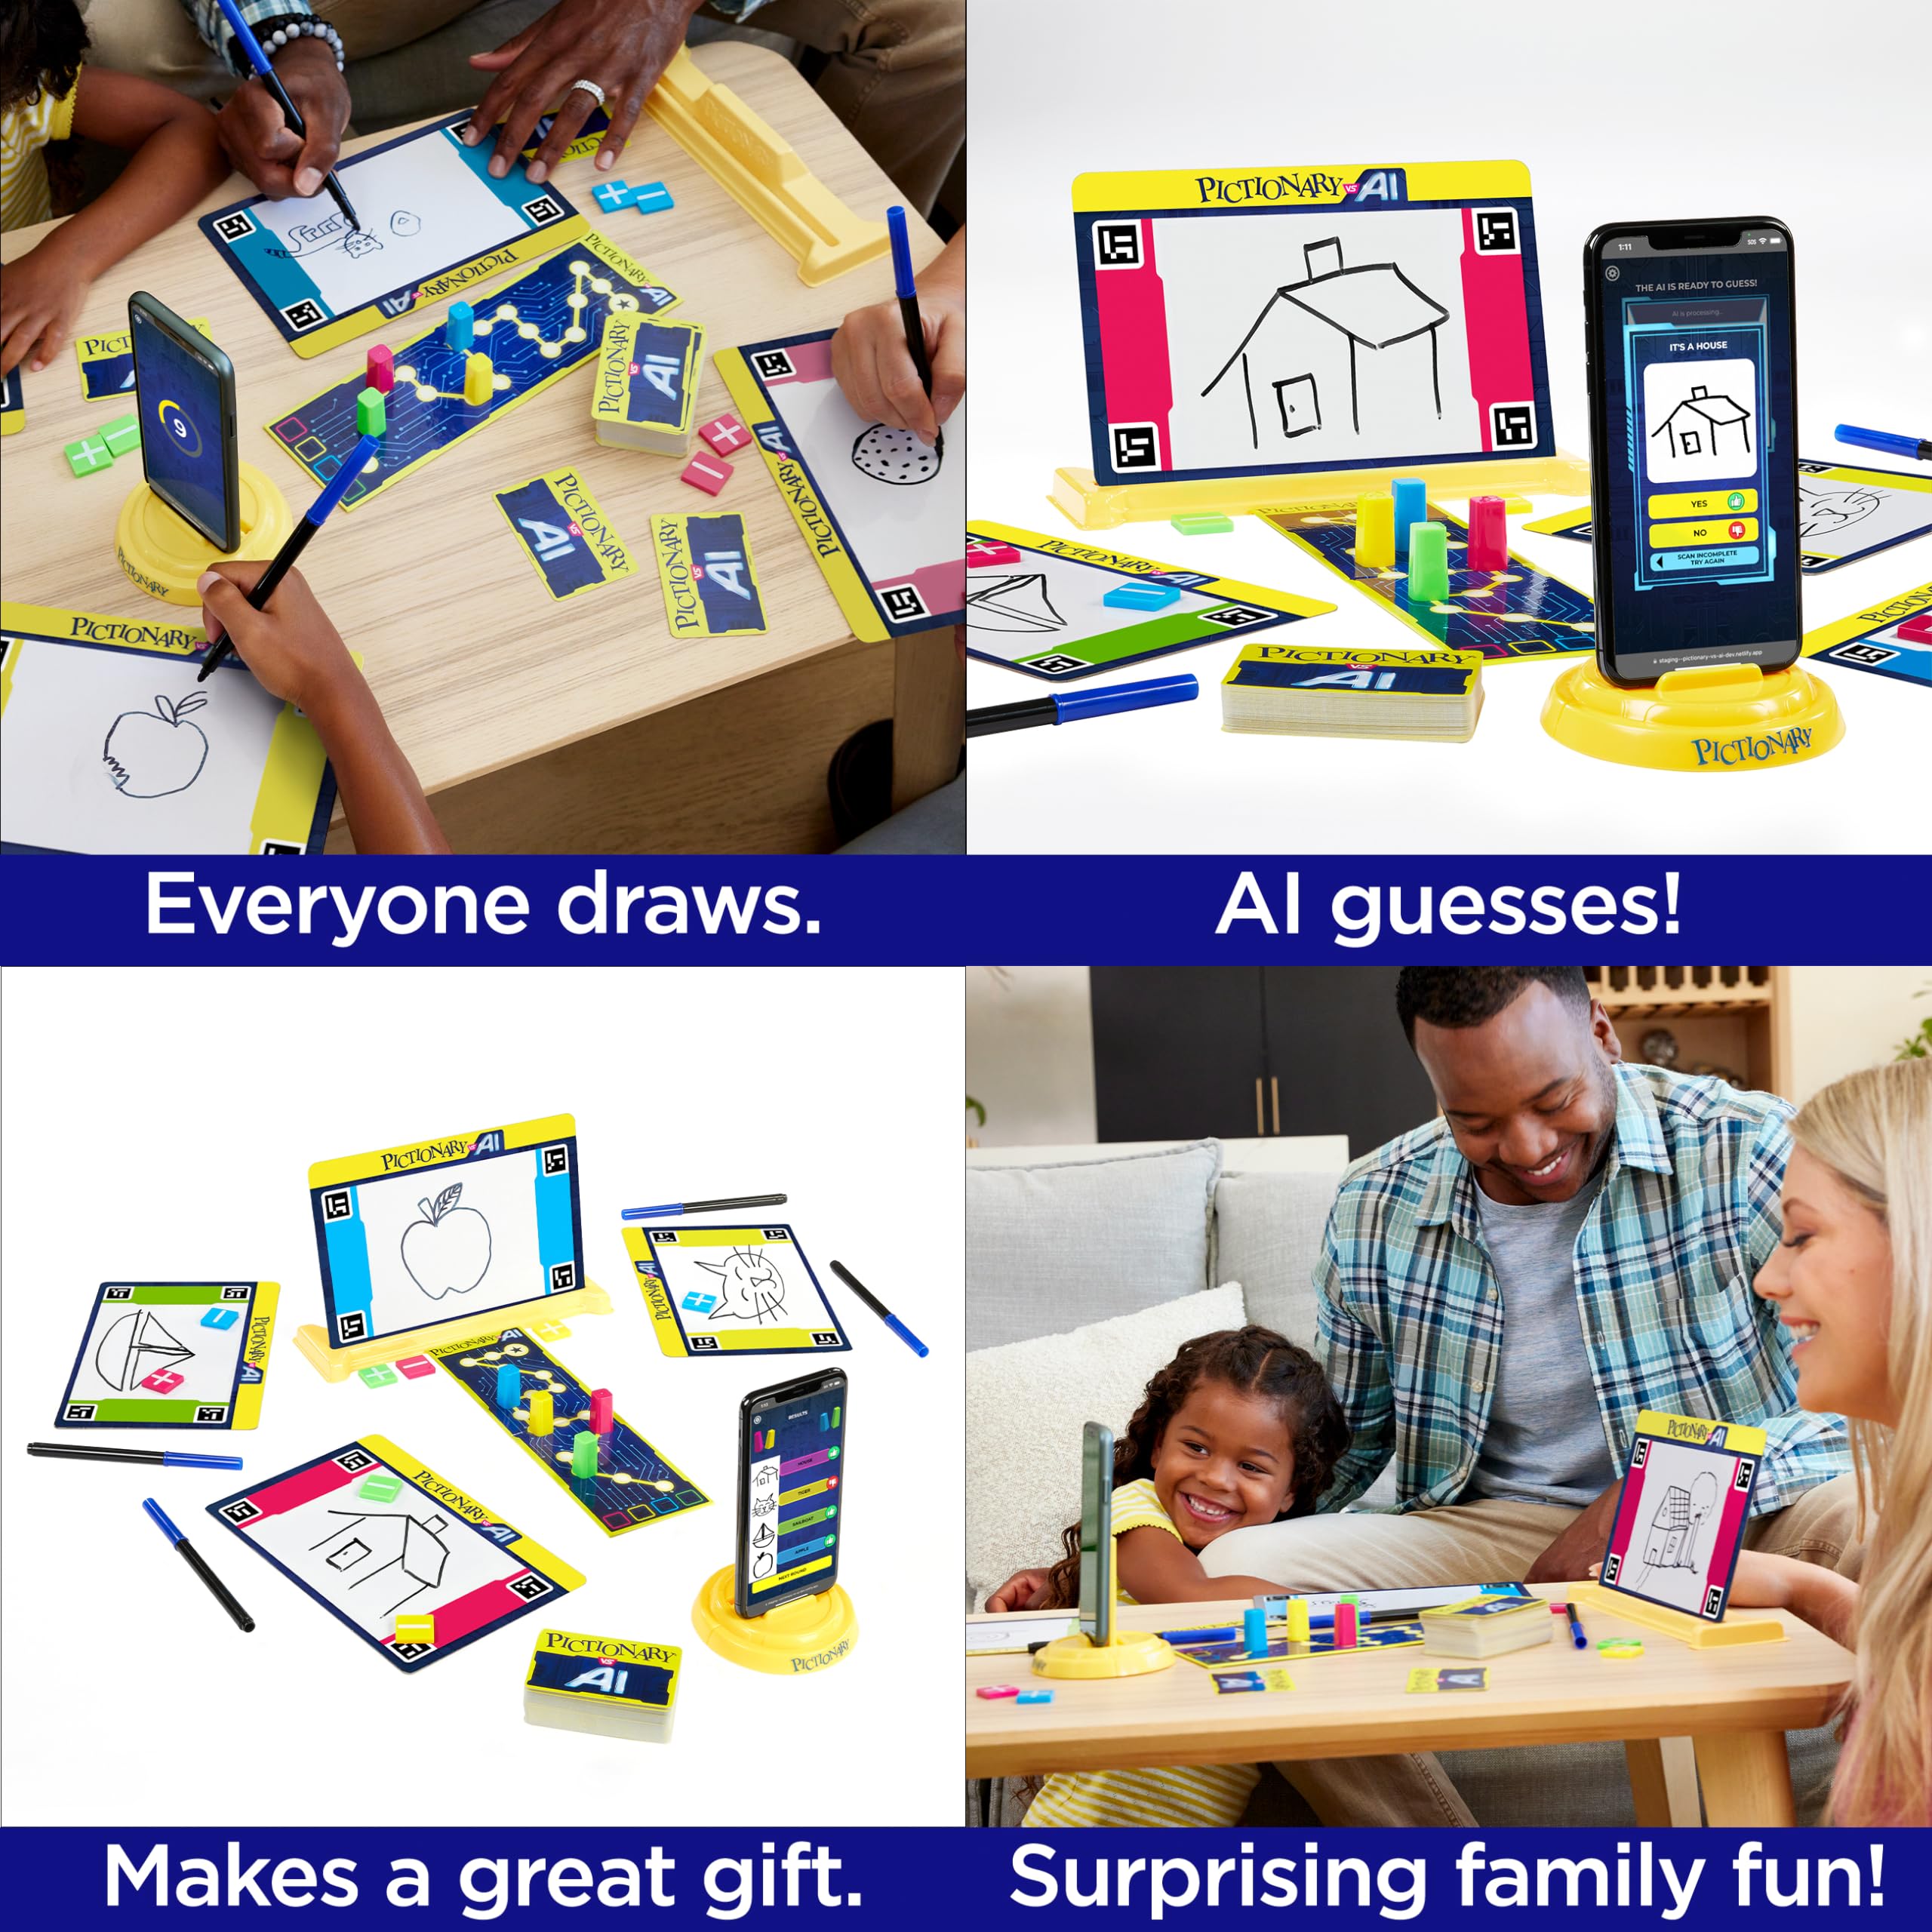 Pictionary Vs. AI Family Game for Kids and Adults and Game Night Using Artificial Intelligence for 2 – 4 Players